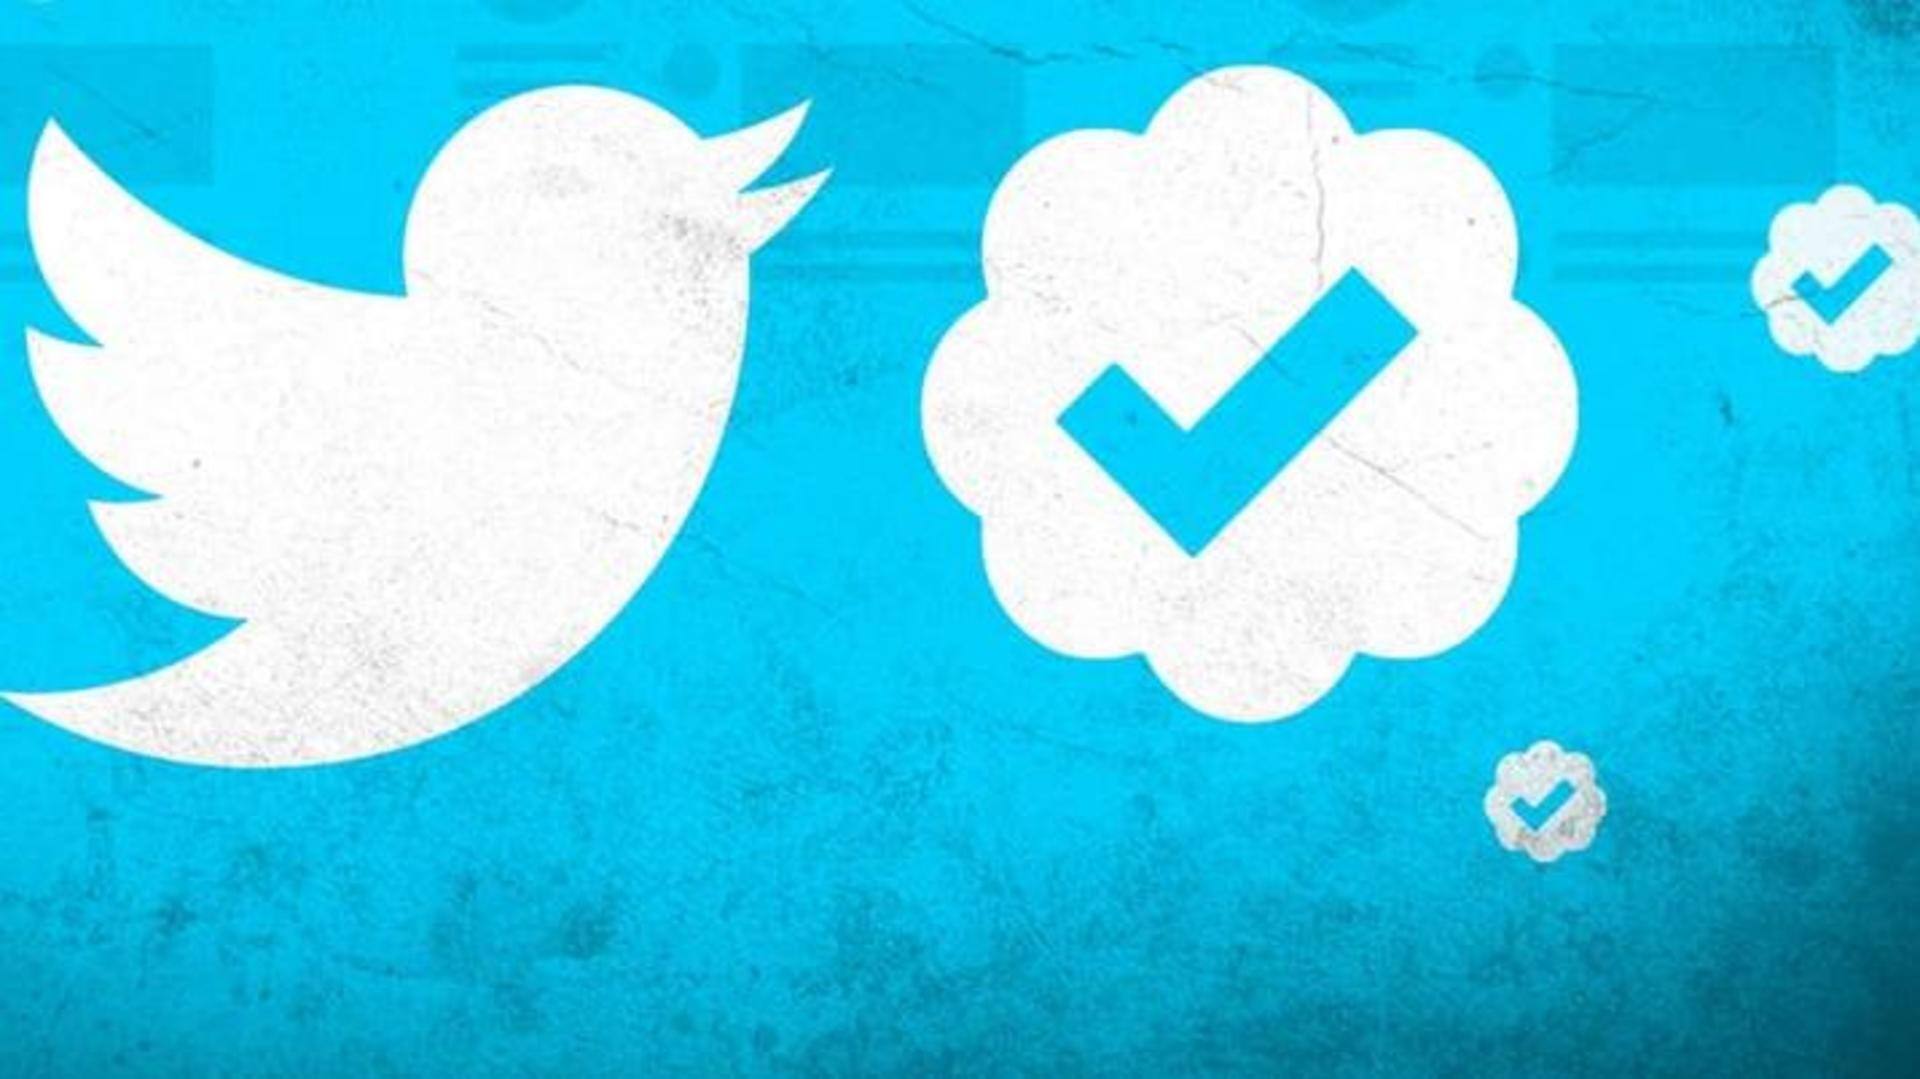 What are Twitter's encrypted DMs and how do they work